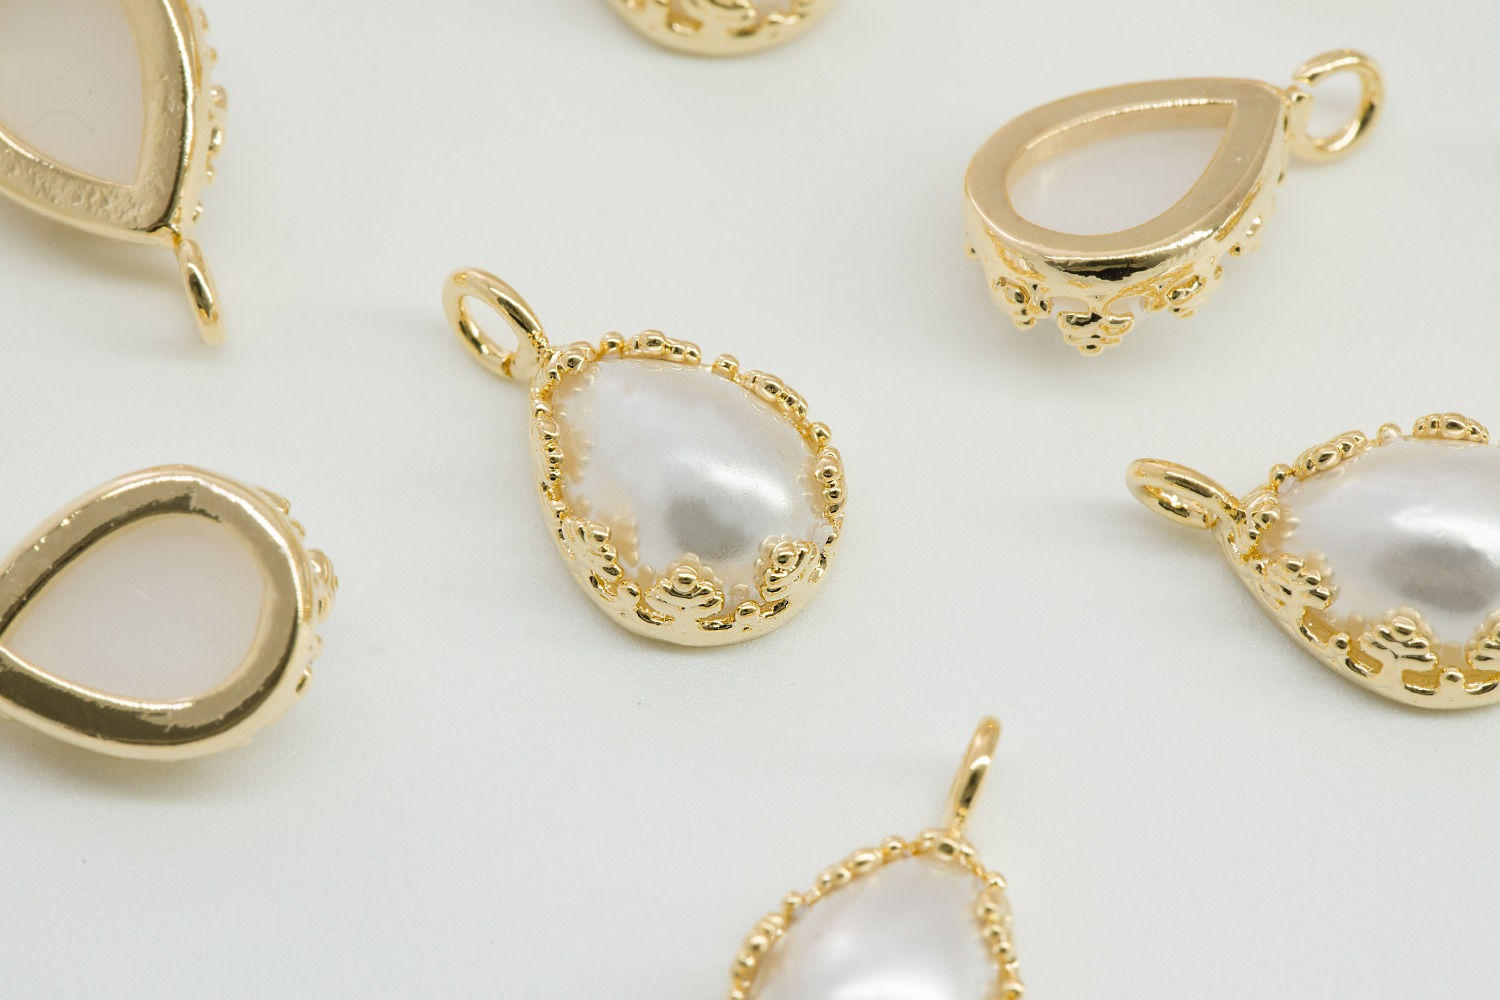 [N51-G9] Dainty pearl drop charm, Gold plated brass, Acrylic pearl, Drop pendant, Wholesale jewelry supplies, 1 piece per color